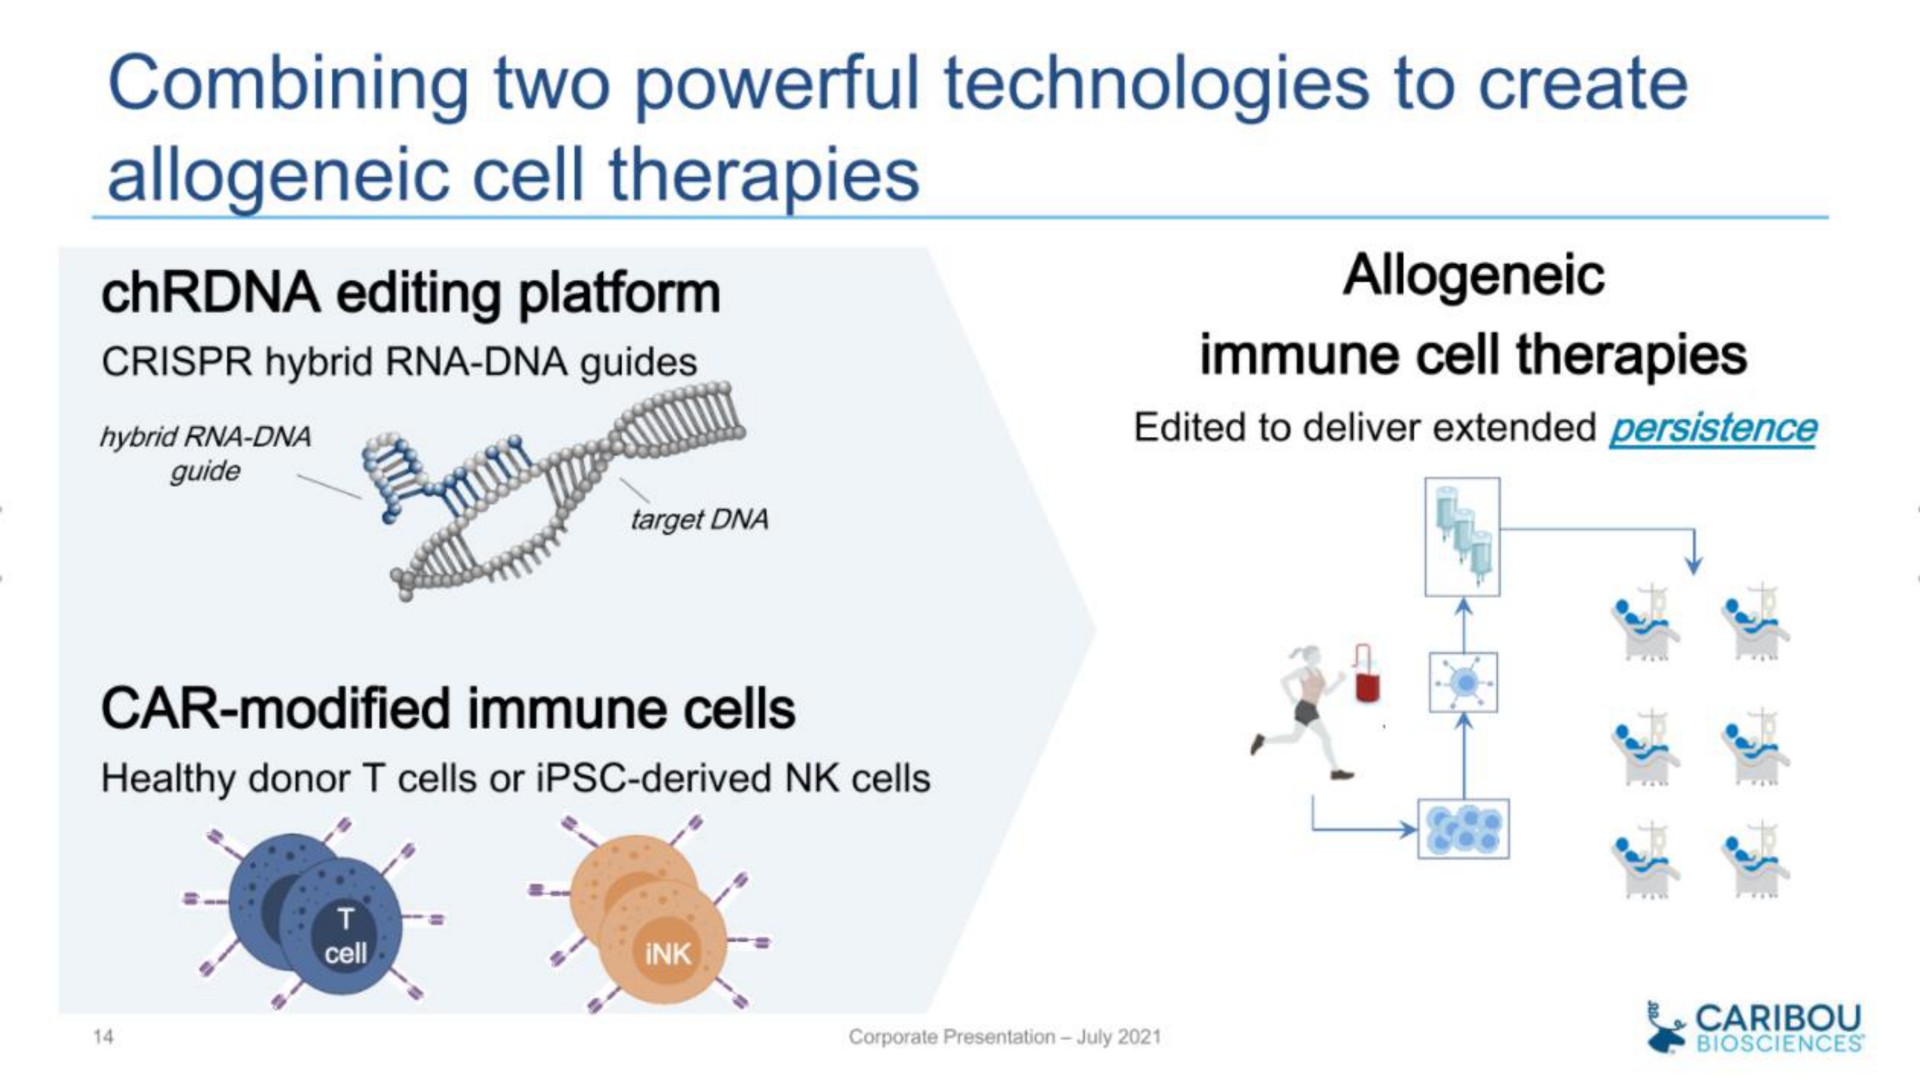 combining two powerful technologies to create cell therapies car modified immune cells rie | Caribou Biosciences